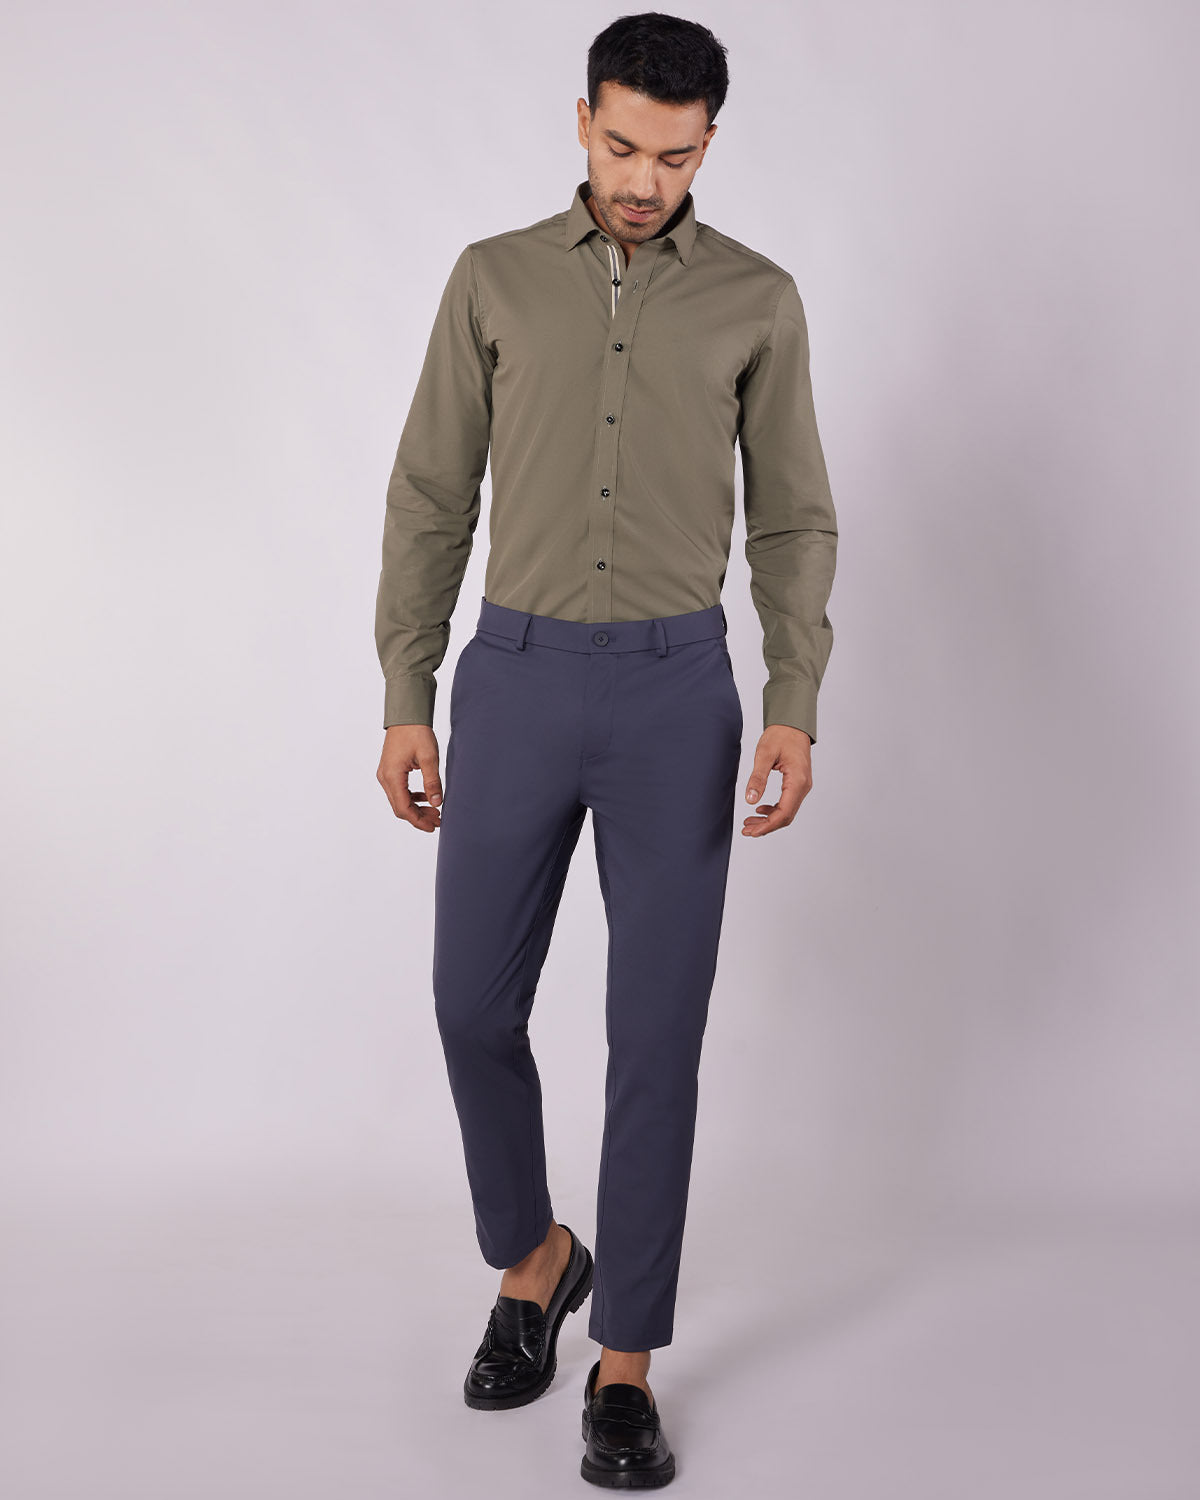 16+ Fantastic What Color Shirt Goes With Light Gray Pants Photos | Mens  fashion suits, Mens outfits, Formal men outfit